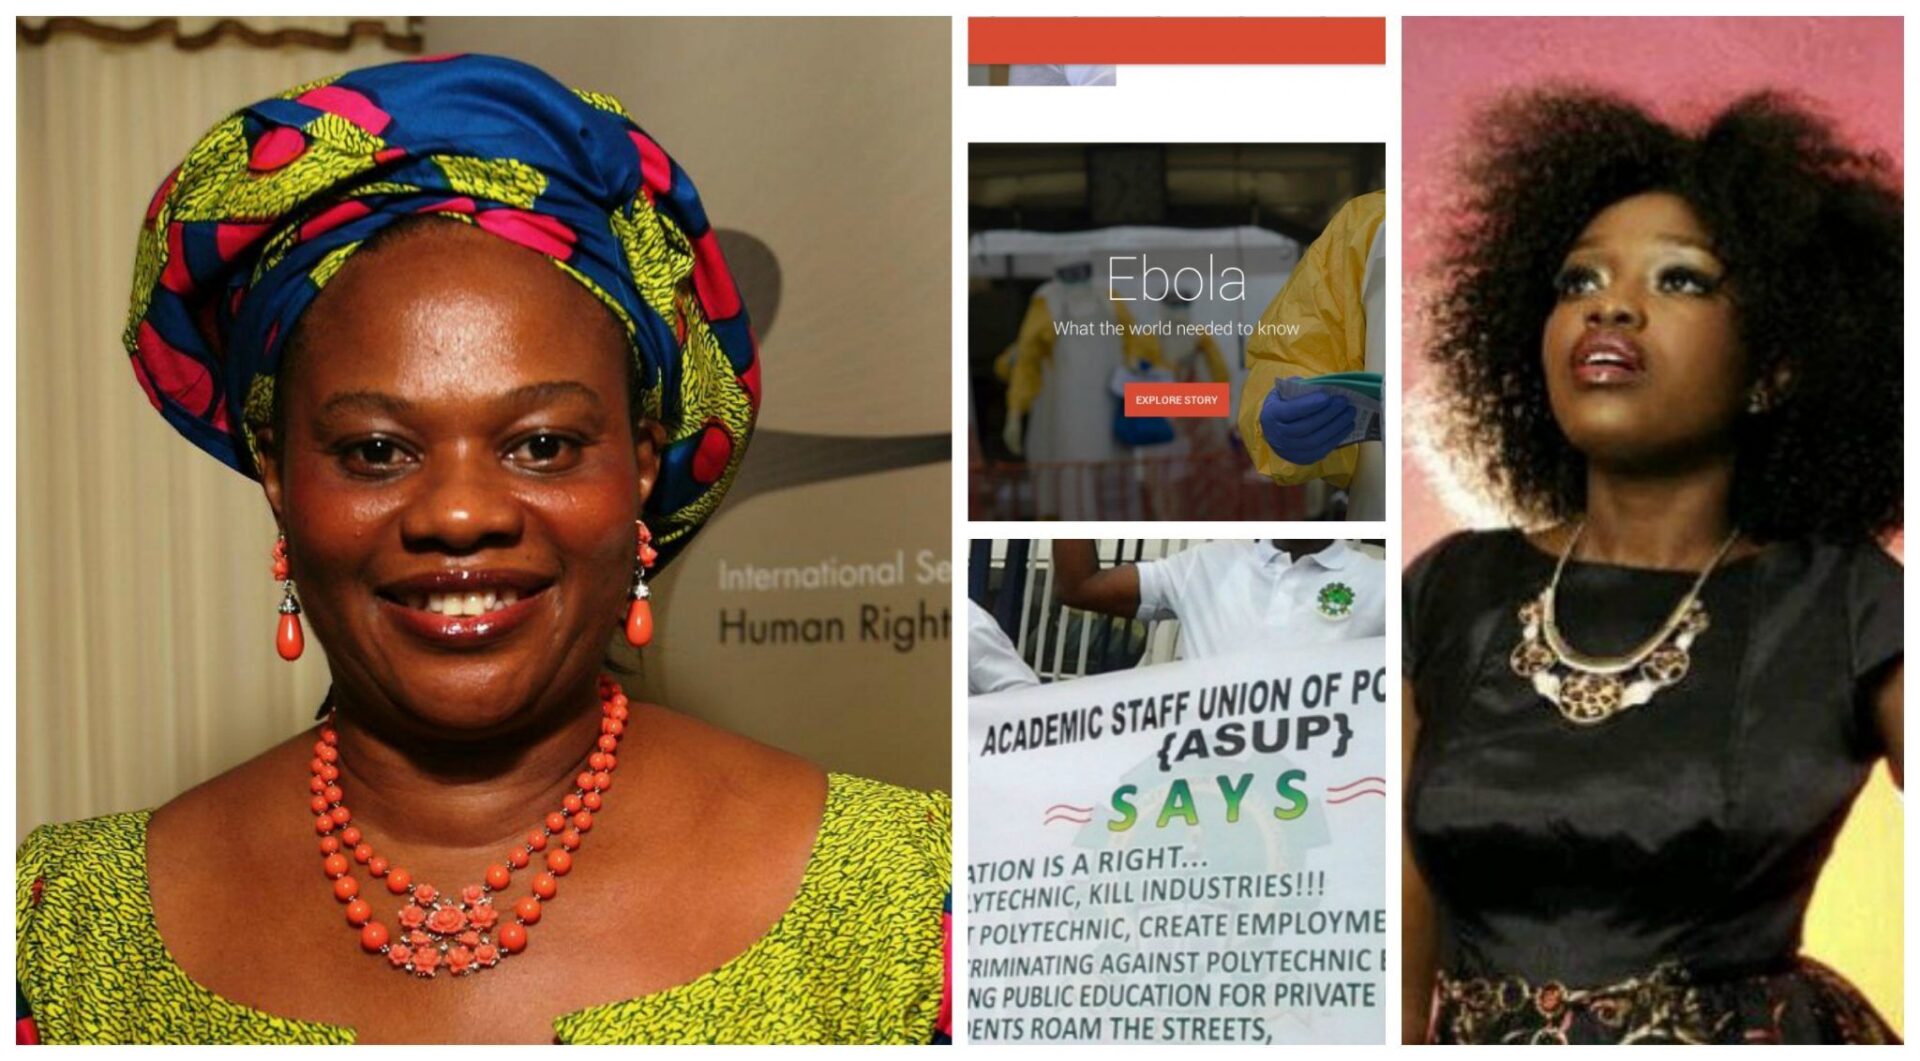 Google: Ebola, Kefee to Akunyili and other Nigeria search trends of 2014